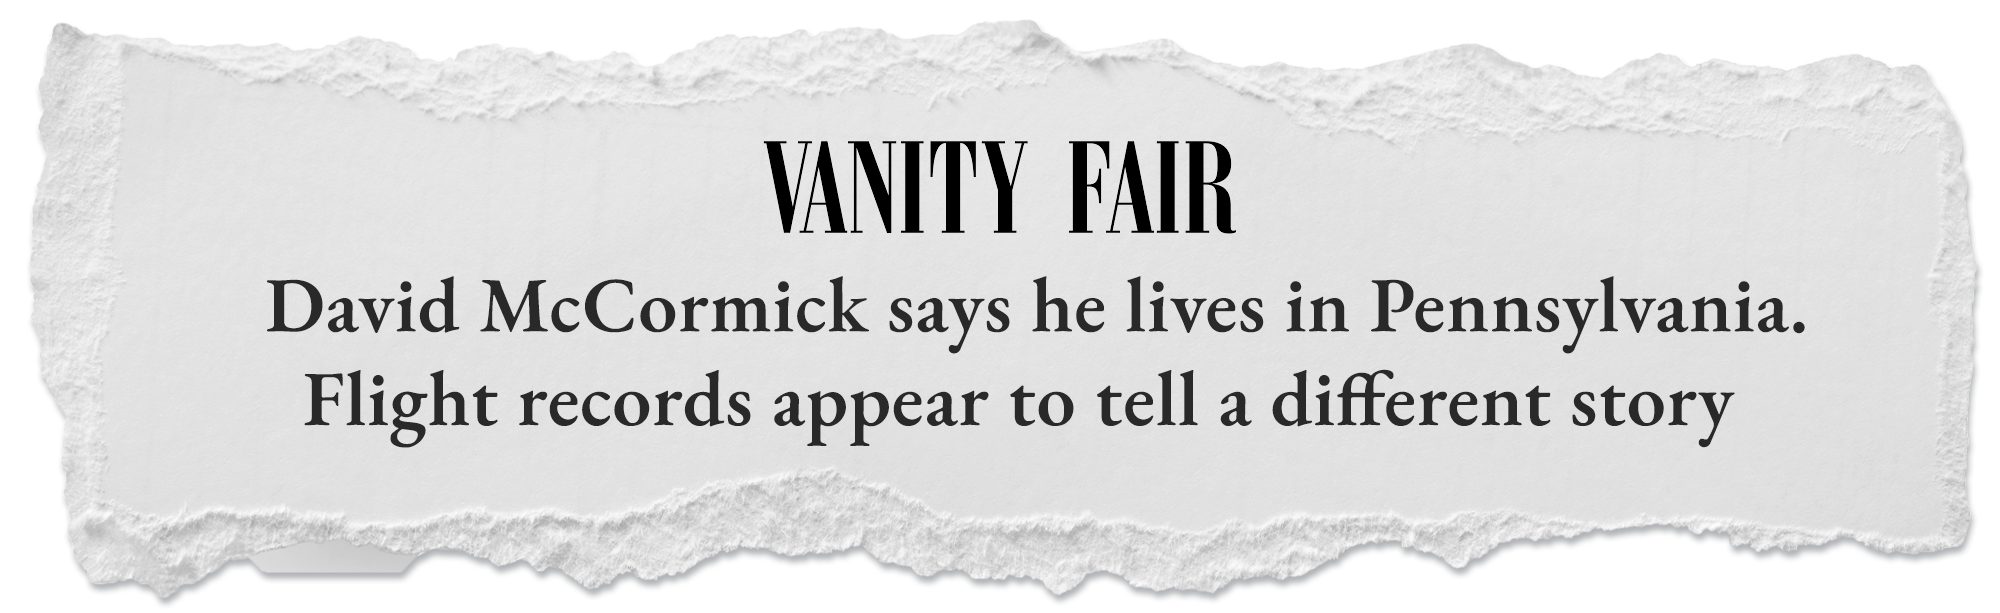 https://www.vanityfair.com/news/2023/09/david-mccormick-says-he-lives-in-pennsylvania-flight-records-appear-to-tell-a-different-story